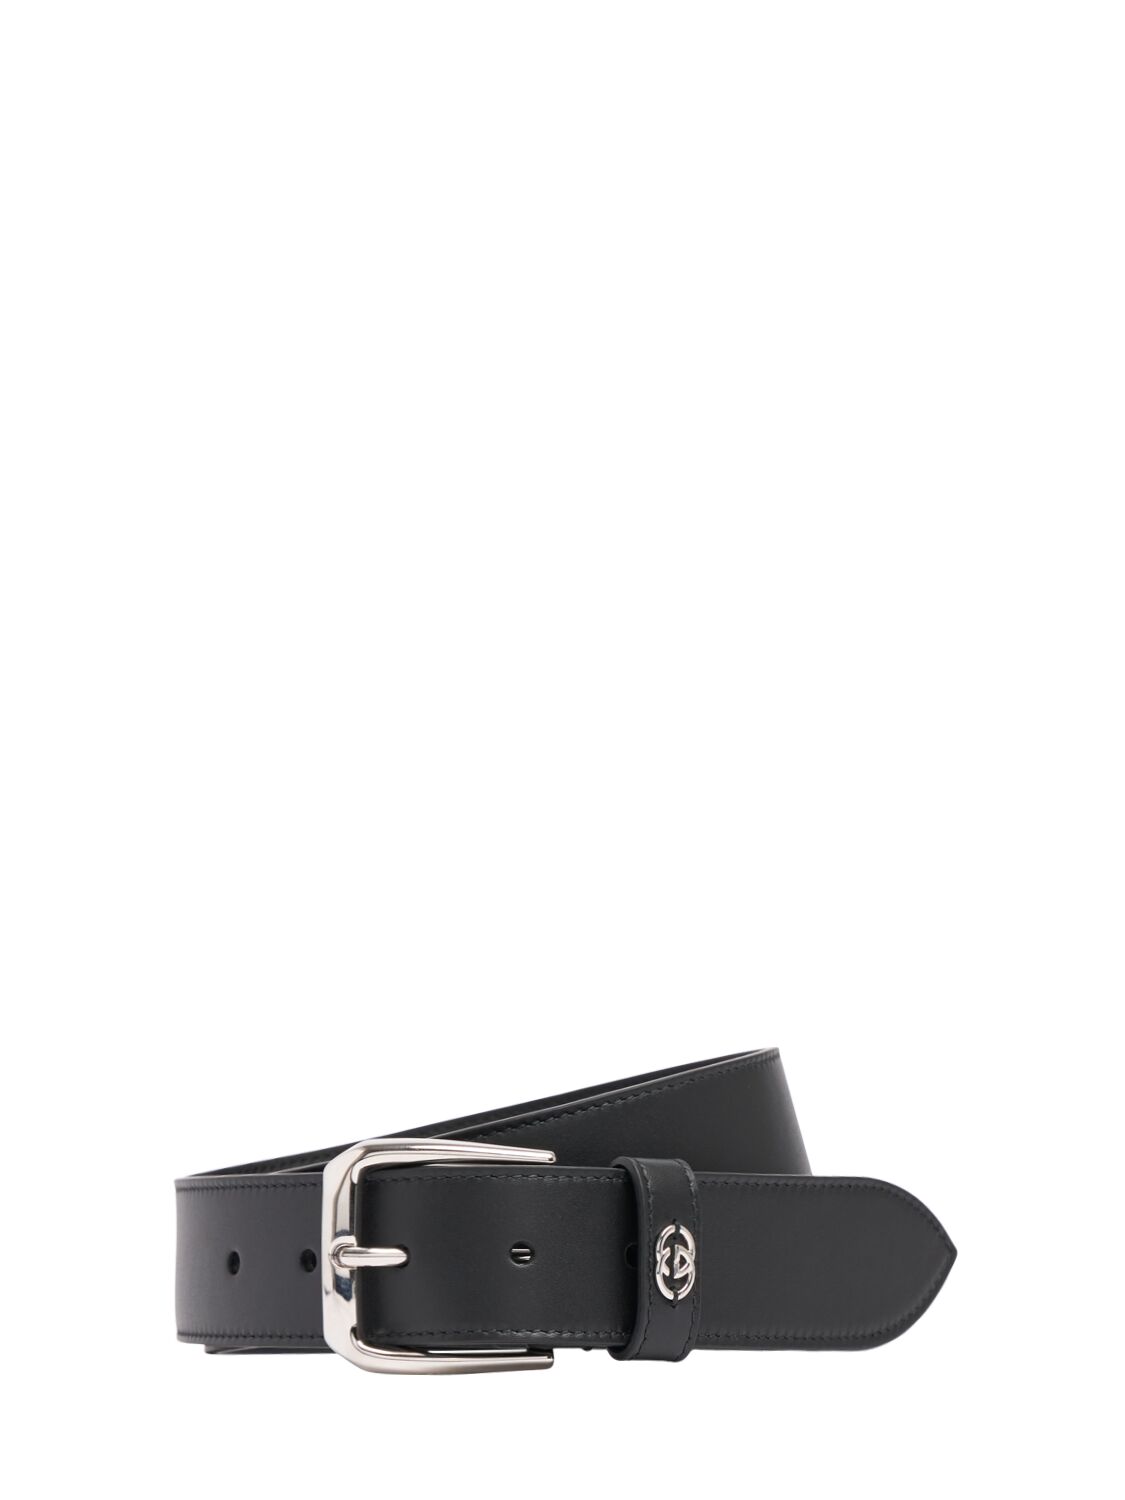 3.5cm Squared Buckle Leather Belt